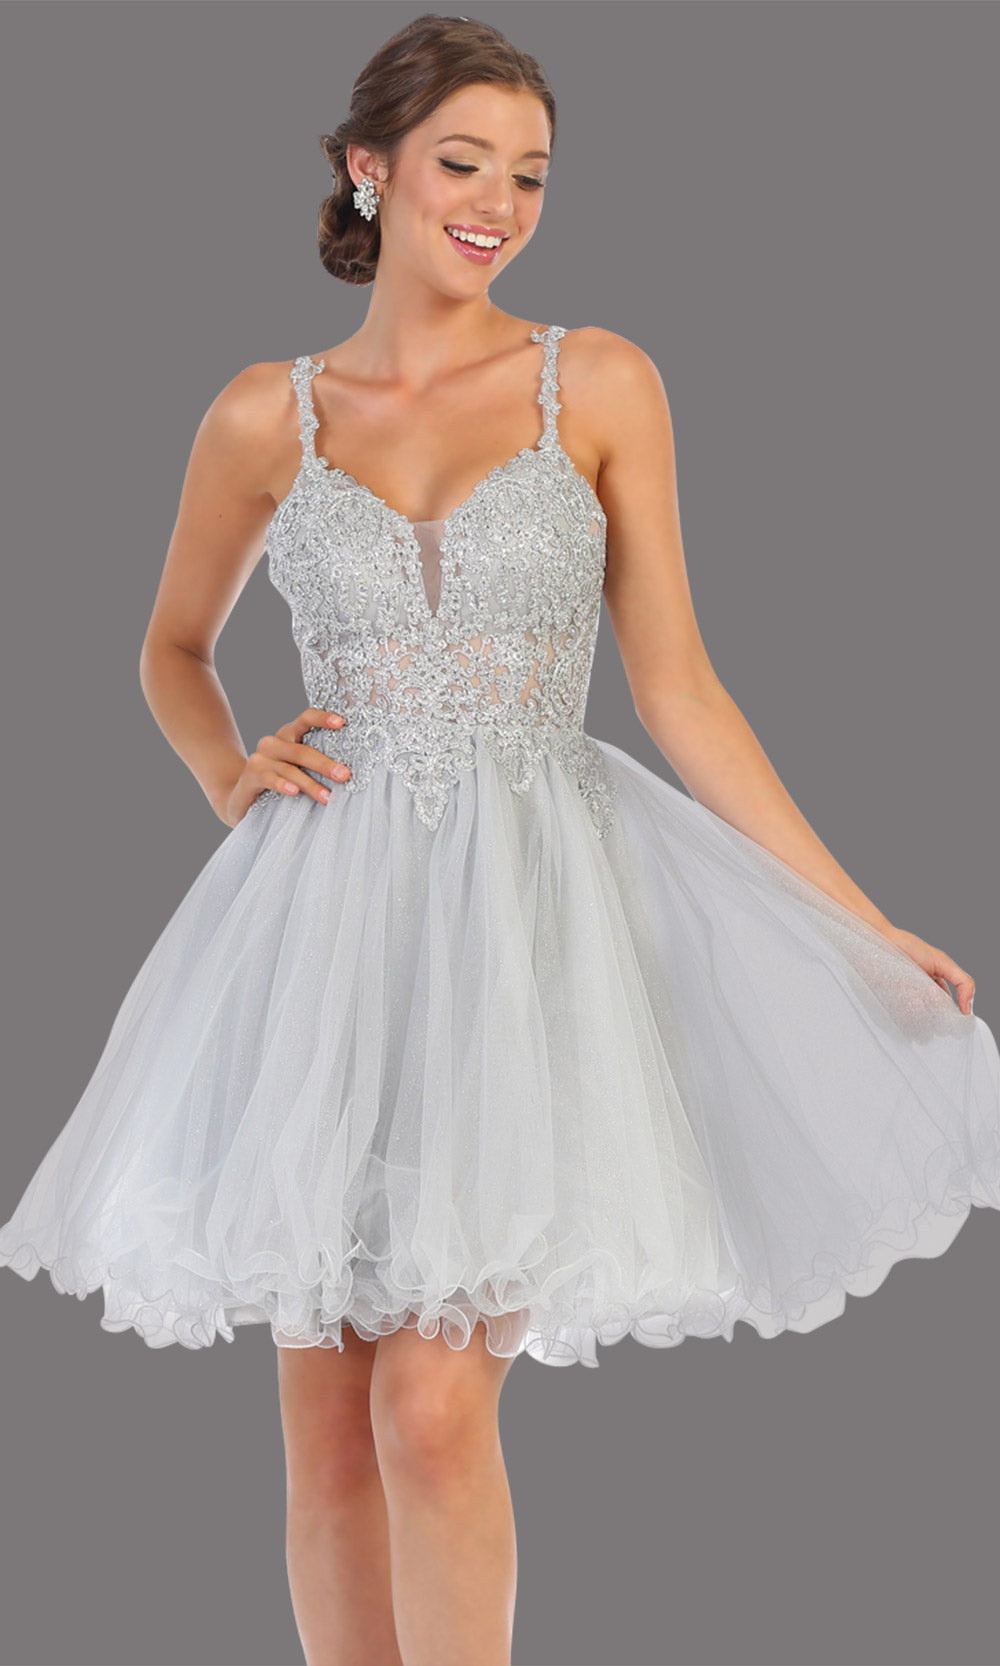 Mayqueen Mq1693 short silver flowy v neck beaded sequin grade 8 graduation dress w/straps & puffy skirt. This light gray party dress is perfect for prom, graduation, grade 8 grad, confirmation dress, bat mitzvah dress, damas. Plus sizes avail.jpg